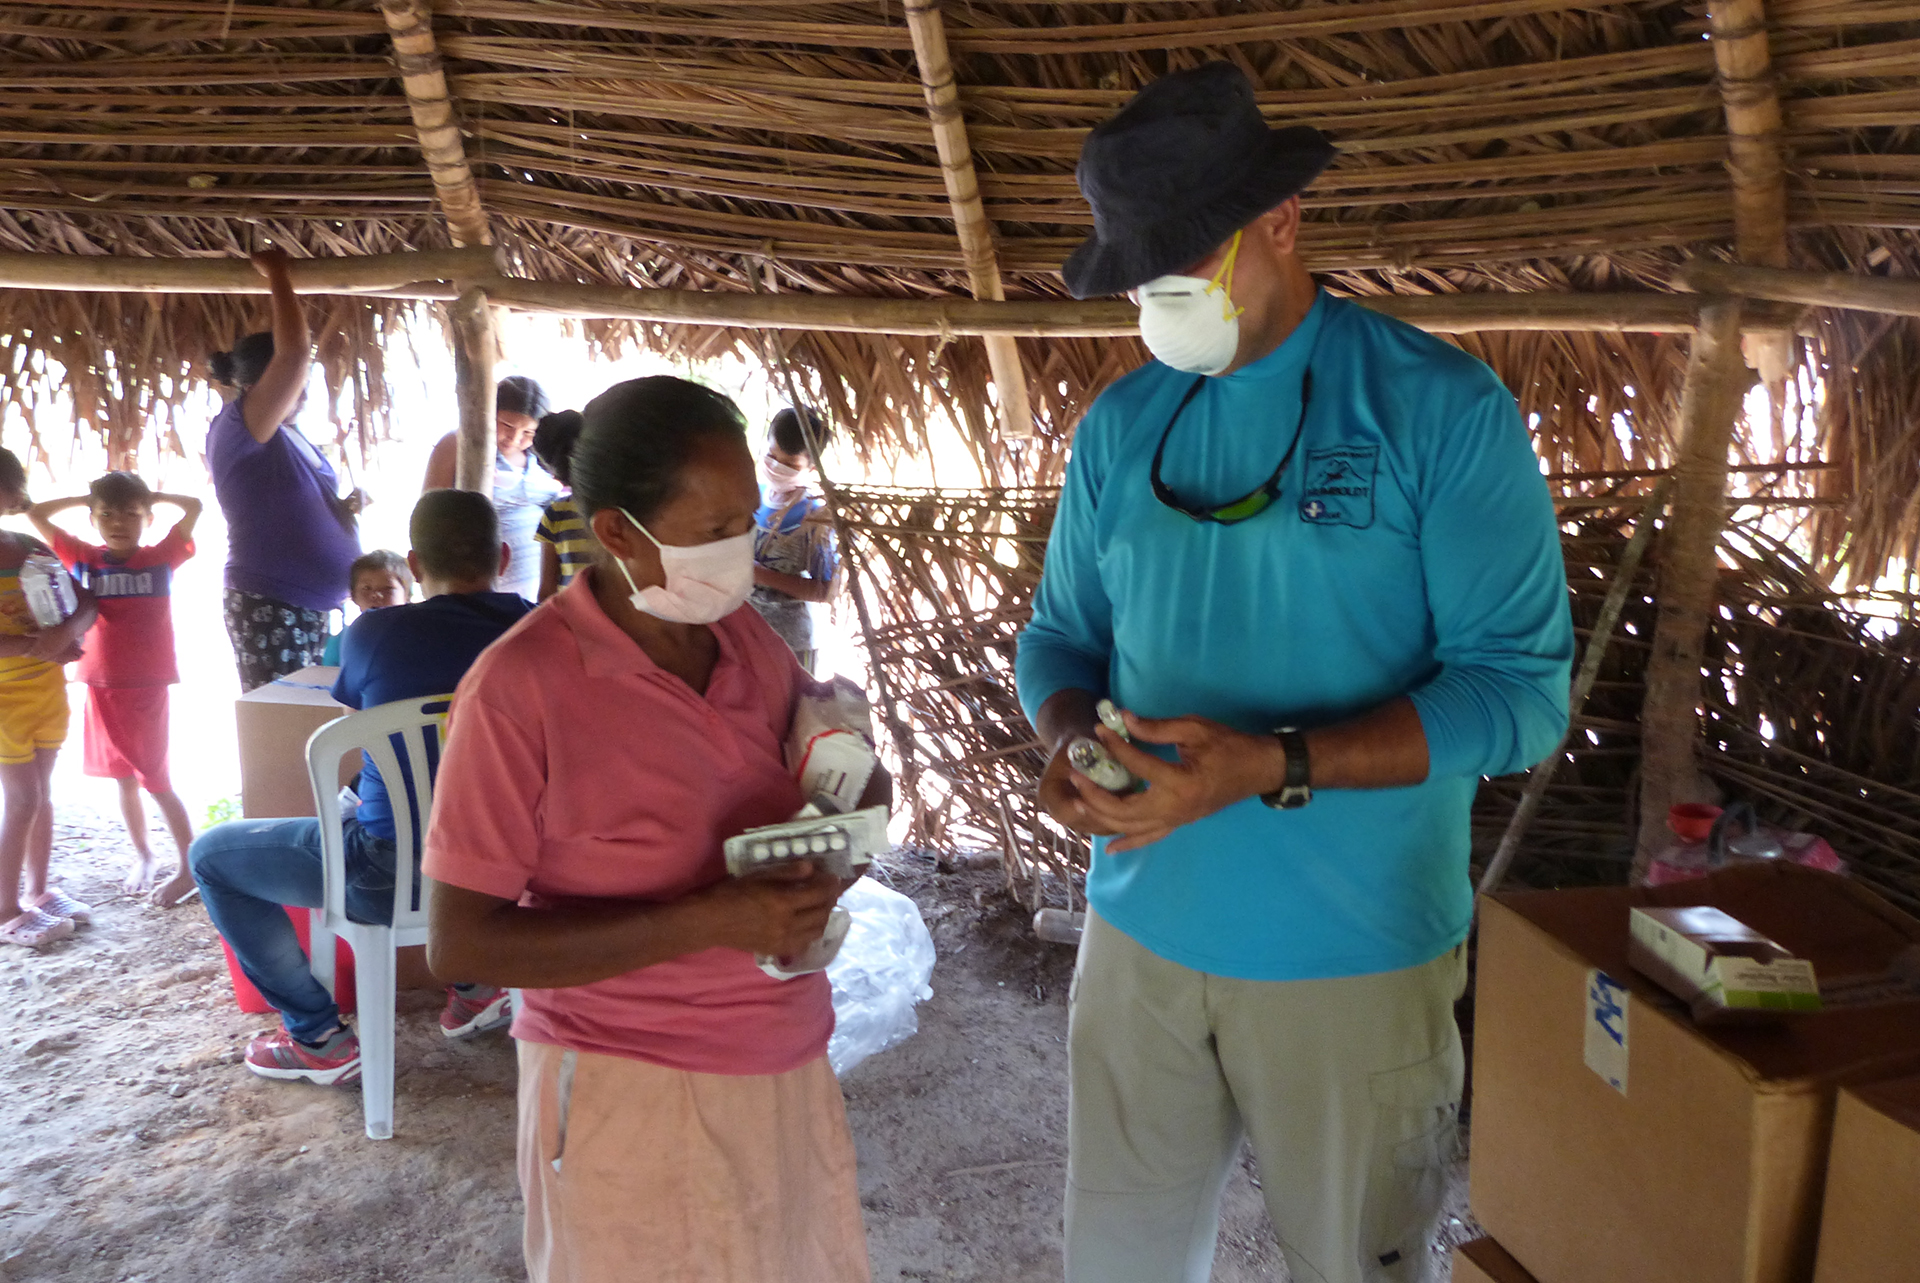 Medical mobile outreach activity completed under an LDS grant in the Bolivar state, Venezuela.